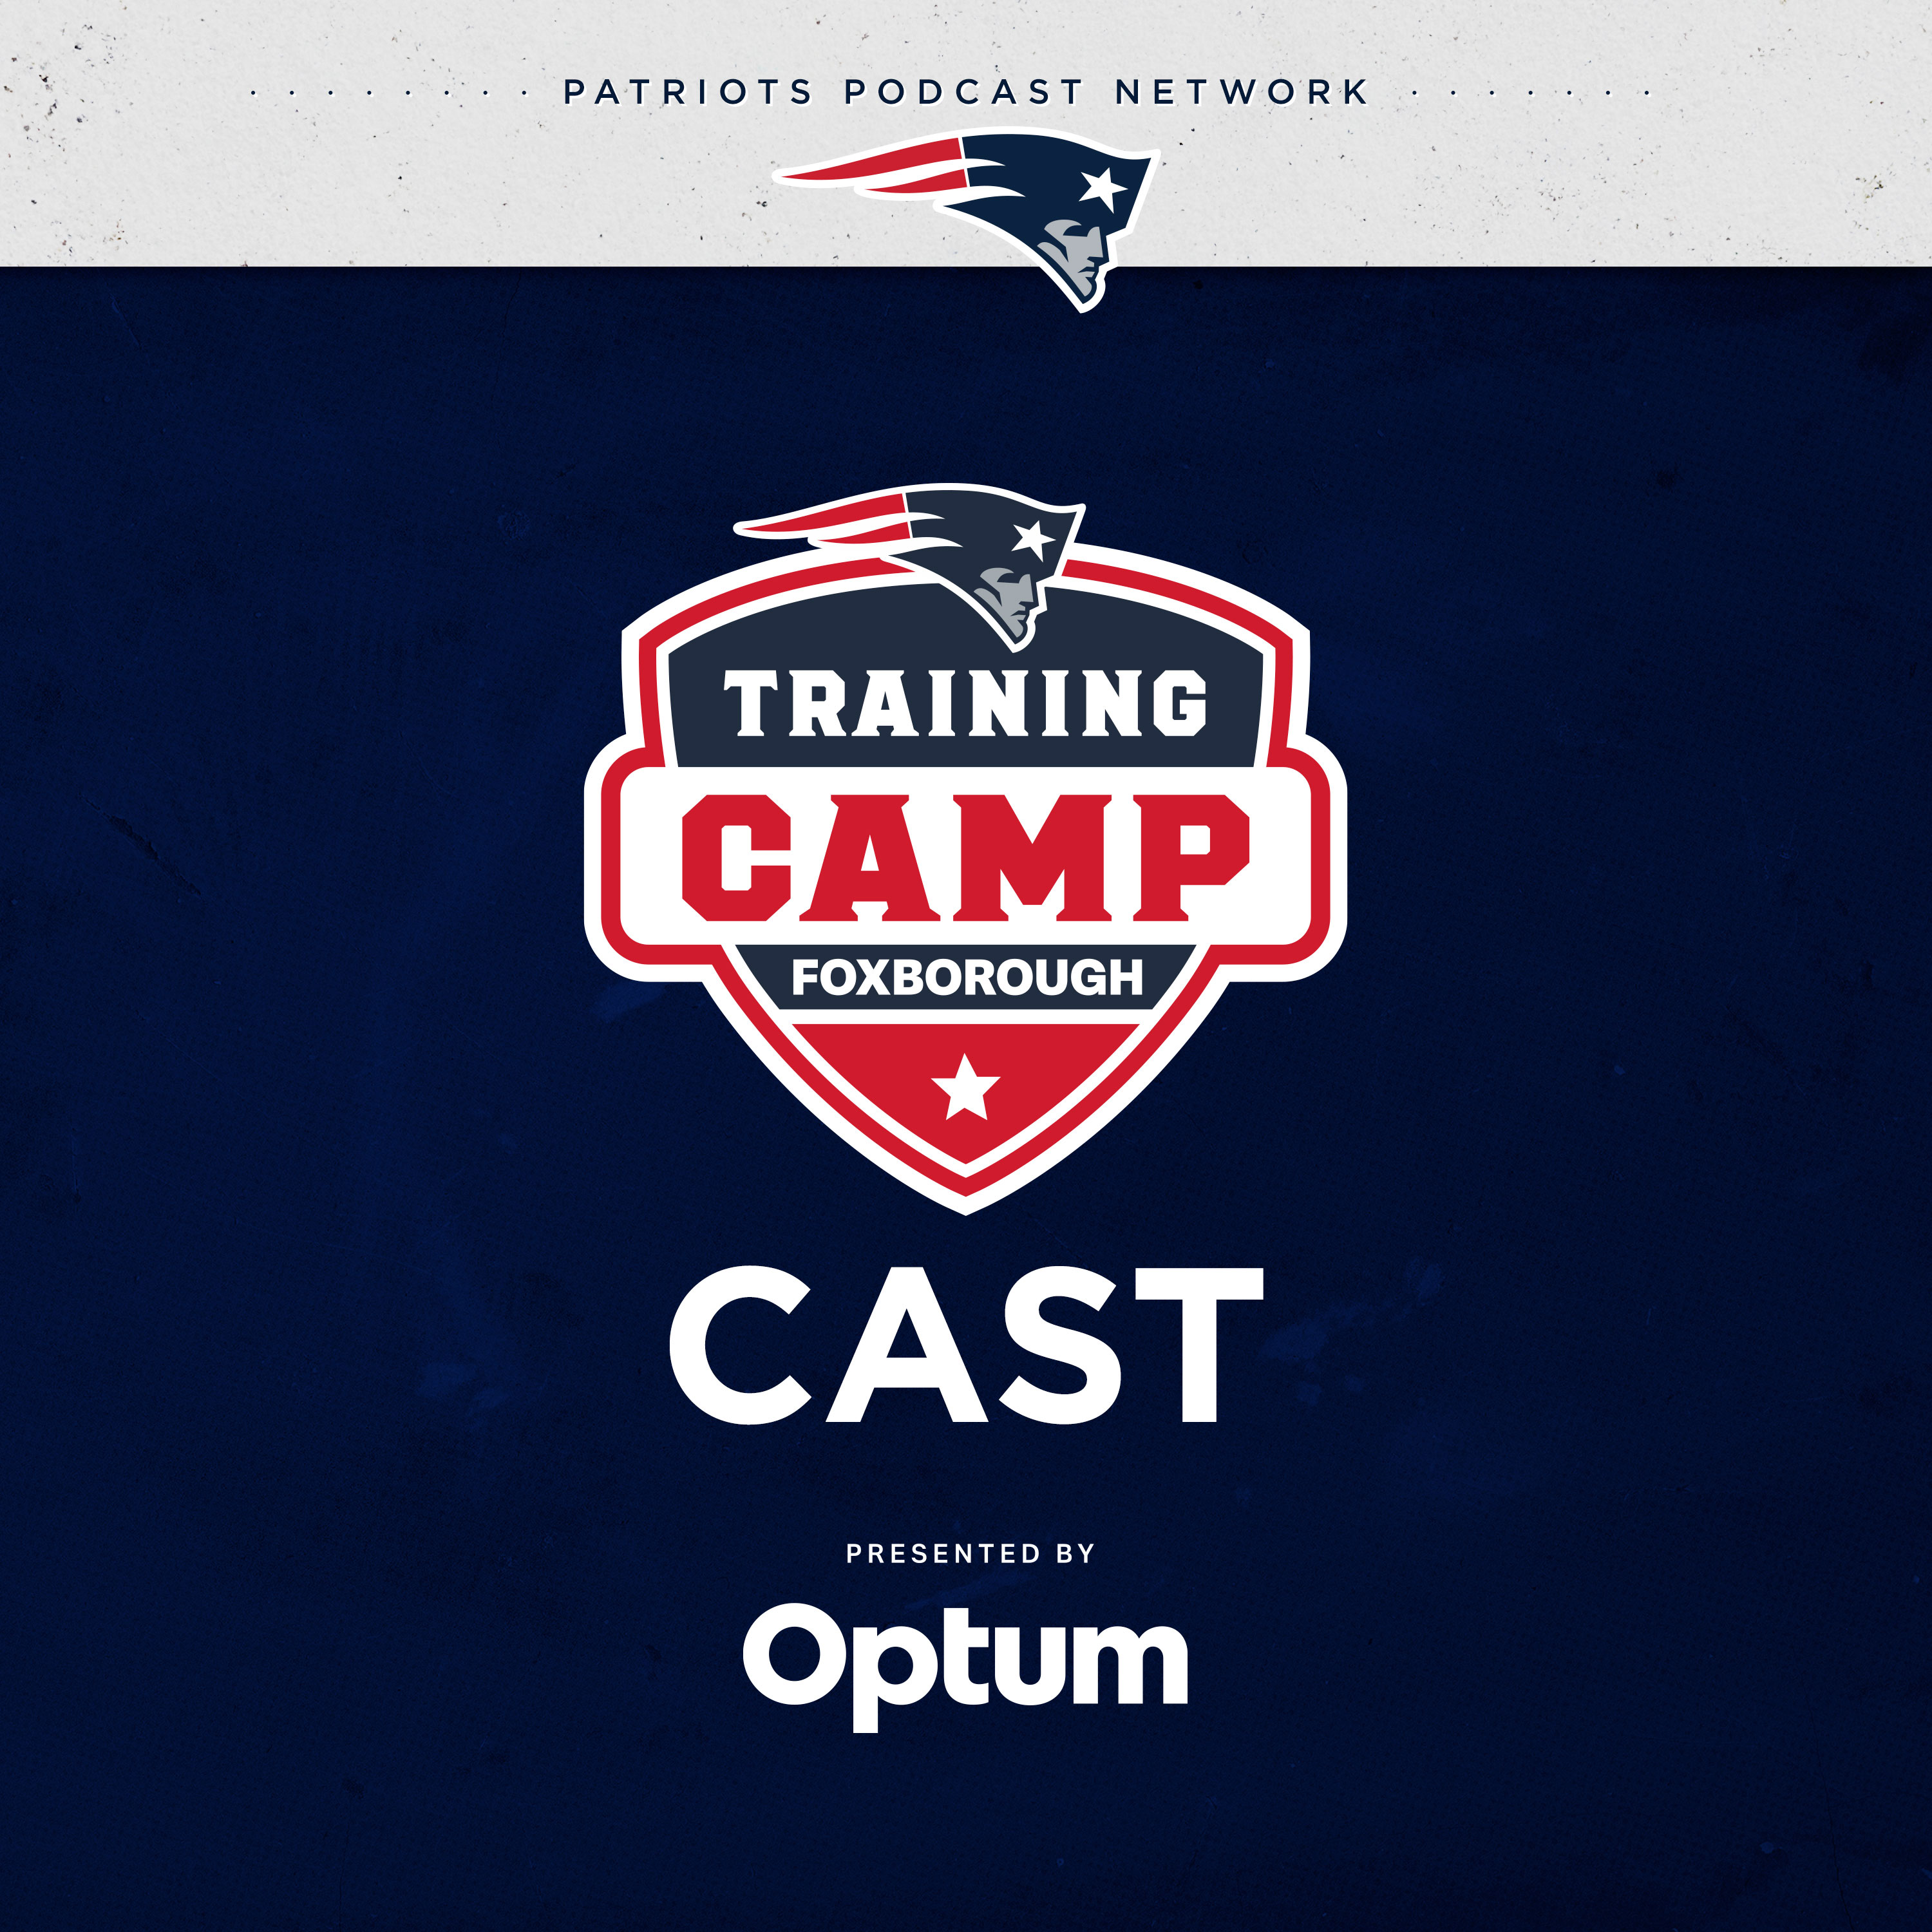 Training Camp Cast 7/30: Day 4 Recap, Offense Punches Back